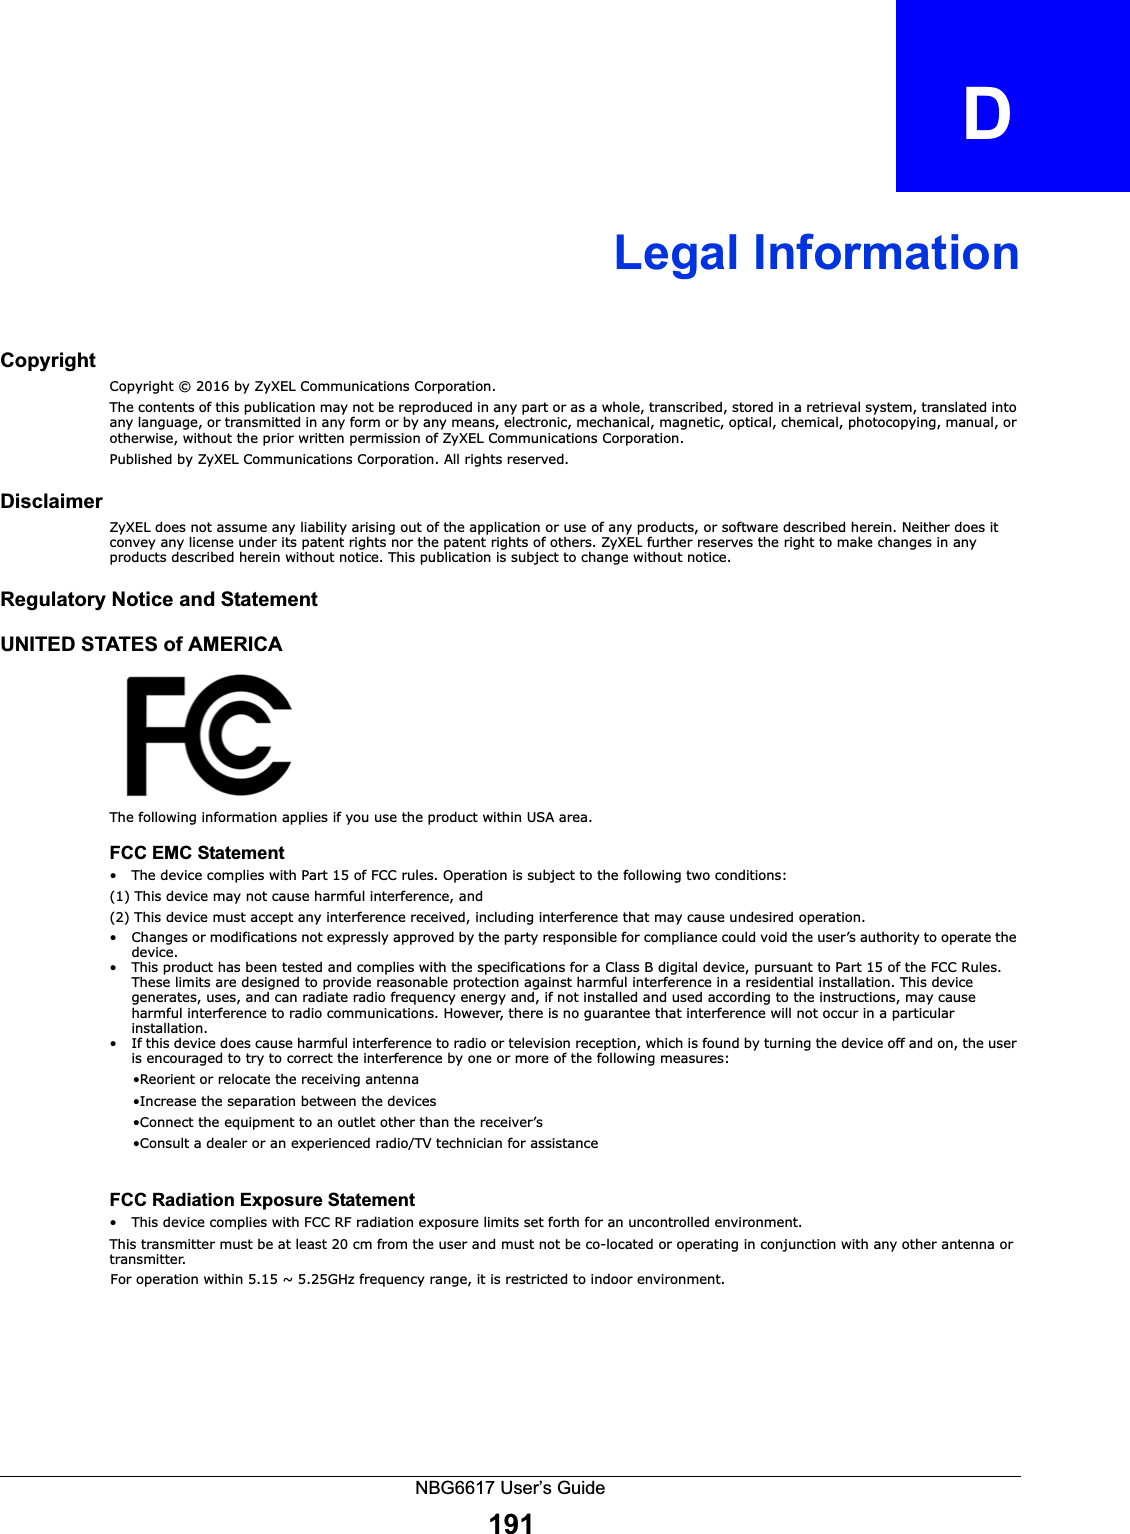 NBG6617 User’s Guide191APPENDIX   DLegal InformationCopyrightCopyright © 2016 by ZyXEL Communications Corporation.The contents of this publication may not be reproduced in any part or as a whole, transcribed, stored in a retrieval system, translated into any language, or transmitted in any form or by any means, electronic, mechanical, magnetic, optical, chemical, photocopying, manual, or otherwise, without the prior written permission of ZyXEL Communications Corporation.Published by ZyXEL Communications Corporation. All rights reserved.DisclaimerZyXEL does not assume any liability arising out of the application or use of any products, or software described herein. Neither does it convey any license under its patent rights nor the patent rights of others. ZyXEL further reserves the right to make changes in any products described herein without notice. This publication is subject to change without notice.Regulatory Notice and StatementUNITED STATES of AMERICAThe following information applies if you use the product within USA area.FCC EMC Statement• The device complies with Part 15 of FCC rules. Operation is subject to the following two conditions:(1) This device may not cause harmful interference, and (2) This device must accept any interference received, including interference that may cause undesired operation.• Changes or modifications not expressly approved by the party responsible for compliance could void the user’s authority to operate the device.• This product has been tested and complies with the specifications for a Class B digital device, pursuant to Part 15 of the FCC Rules. These limits are designed to provide reasonable protection against harmful interference in a residential installation. This device generates, uses, and can radiate radio frequency energy and, if not installed and used according to the instructions, may cause harmful interference to radio communications. However, there is no guarantee that interference will not occur in a particular installation. • If this device does cause harmful interference to radio or television reception, which is found by turning the device off and on, the user is encouraged to try to correct the interference by one or more of the following measures:     •Reorient or relocate the receiving antenna      •Increase the separation between the devices      •Connect the equipment to an outlet other than the receiver’s      •Consult a dealer or an experienced radio/TV technician for assistanceFCC Radiation Exposure Statement• This device complies with FCC RF radiation exposure limits set forth for an uncontrolled environment. This transmitter must be at least 20 cm from the user and must not be co-located or operating in conjunction with any other antenna or transmitter.CANADA  The following information applies if you use the product within Canada areaIndustry Canada ICES statementCAN ICES-3 (B)/NMB-3(B)                          For operation within 5.15 ~ 5.25GHz frequency range, it is restricted to indoor environment.